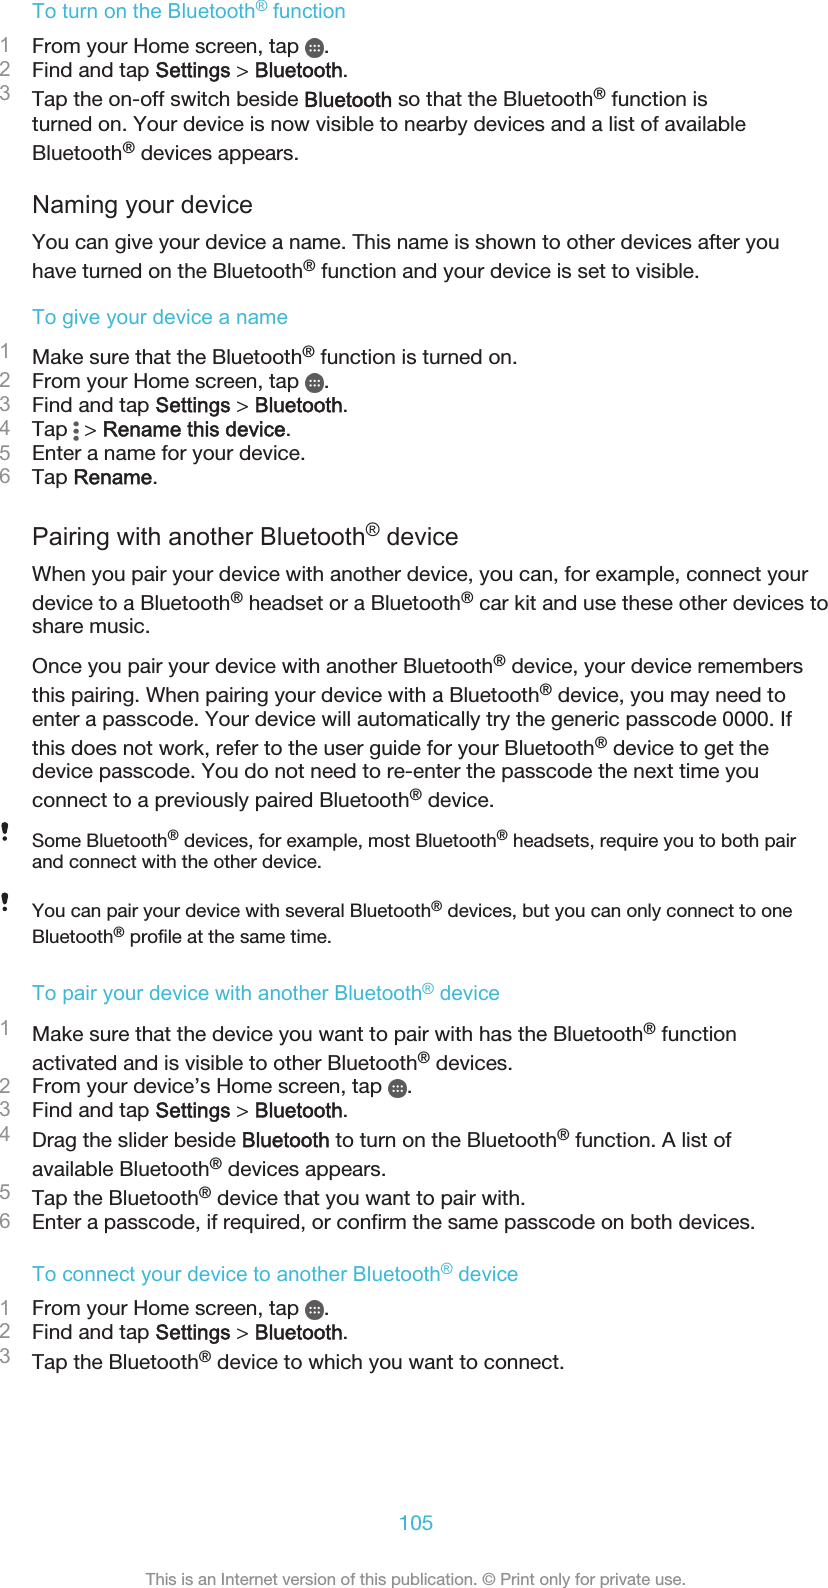 To turn on the Bluetooth® function1From your Home screen, tap  .2Find and tap Settings &gt; Bluetooth.3Tap the on-off switch beside Bluetooth so that the Bluetooth® function isturned on. Your device is now visible to nearby devices and a list of availableBluetooth® devices appears.Naming your deviceYou can give your device a name. This name is shown to other devices after youhave turned on the Bluetooth® function and your device is set to visible.To give your device a name1Make sure that the Bluetooth® function is turned on.2From your Home screen, tap  .3Find and tap Settings &gt; Bluetooth.4Tap   &gt; Rename this device.5Enter a name for your device.6Tap Rename.Pairing with another Bluetooth® deviceWhen you pair your device with another device, you can, for example, connect yourdevice to a Bluetooth® headset or a Bluetooth® car kit and use these other devices toshare music.Once you pair your device with another Bluetooth® device, your device remembersthis pairing. When pairing your device with a Bluetooth® device, you may need toenter a passcode. Your device will automatically try the generic passcode 0000. Ifthis does not work, refer to the user guide for your Bluetooth® device to get thedevice passcode. You do not need to re-enter the passcode the next time youconnect to a previously paired Bluetooth® device.Some Bluetooth® devices, for example, most Bluetooth® headsets, require you to both pairand connect with the other device.You can pair your device with several Bluetooth® devices, but you can only connect to oneBluetooth® profile at the same time.To pair your device with another Bluetooth® device1Make sure that the device you want to pair with has the Bluetooth® functionactivated and is visible to other Bluetooth® devices.2From your device’s Home screen, tap  .3Find and tap Settings &gt; Bluetooth.4Drag the slider beside Bluetooth to turn on the Bluetooth® function. A list ofavailable Bluetooth® devices appears.5Tap the Bluetooth® device that you want to pair with.6Enter a passcode, if required, or confirm the same passcode on both devices.To connect your device to another Bluetooth® device1From your Home screen, tap  .2Find and tap Settings &gt; Bluetooth.3Tap the Bluetooth® device to which you want to connect.105This is an Internet version of this publication. © Print only for private use.